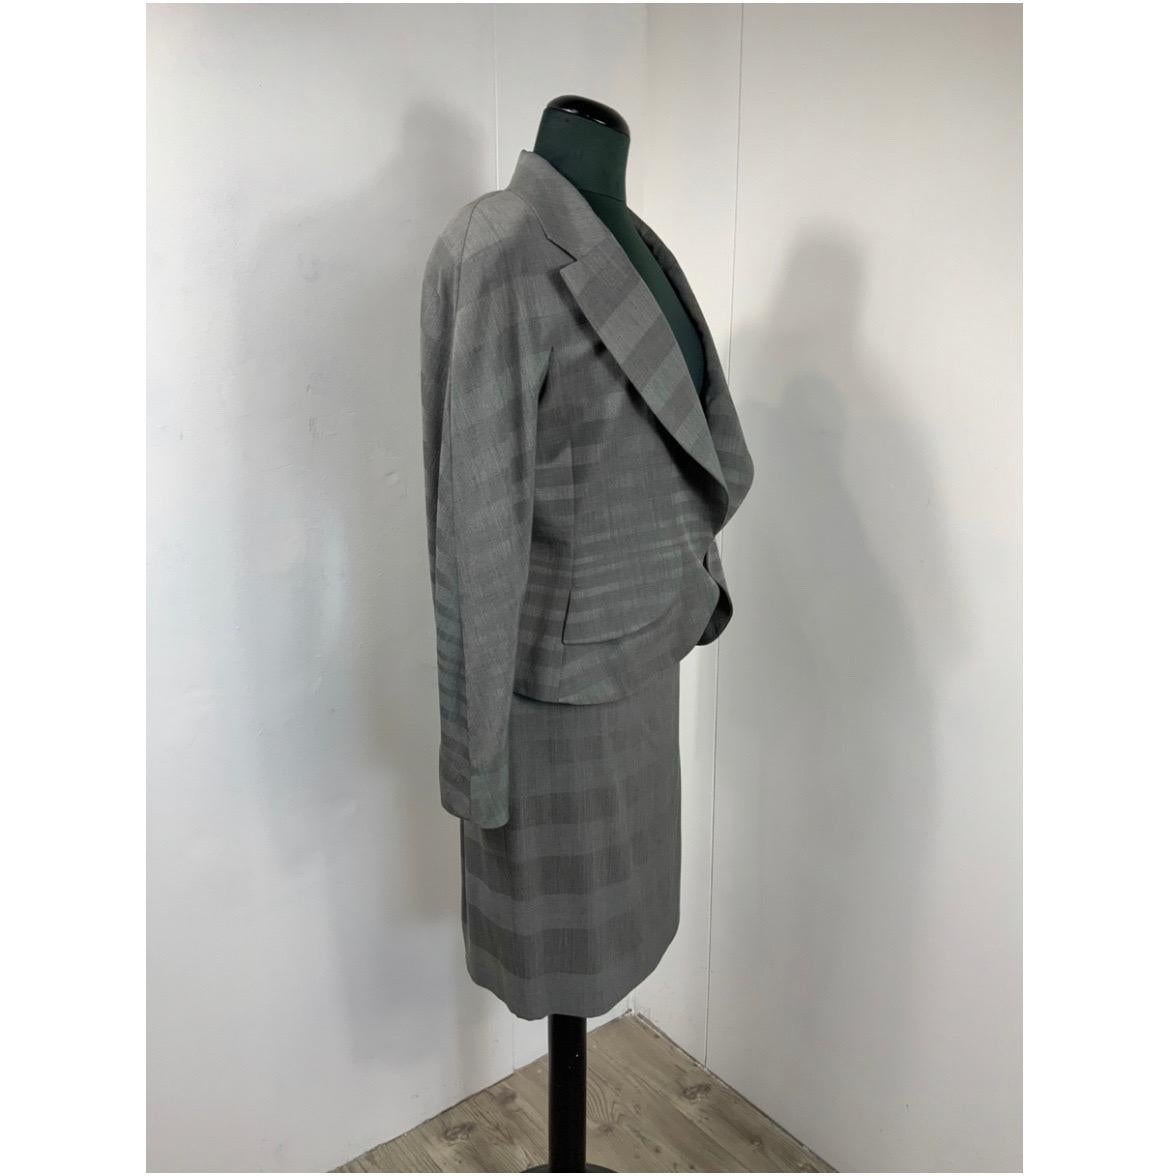 Christian Dior Suit in Grey In Excellent Condition For Sale In Carnate, IT